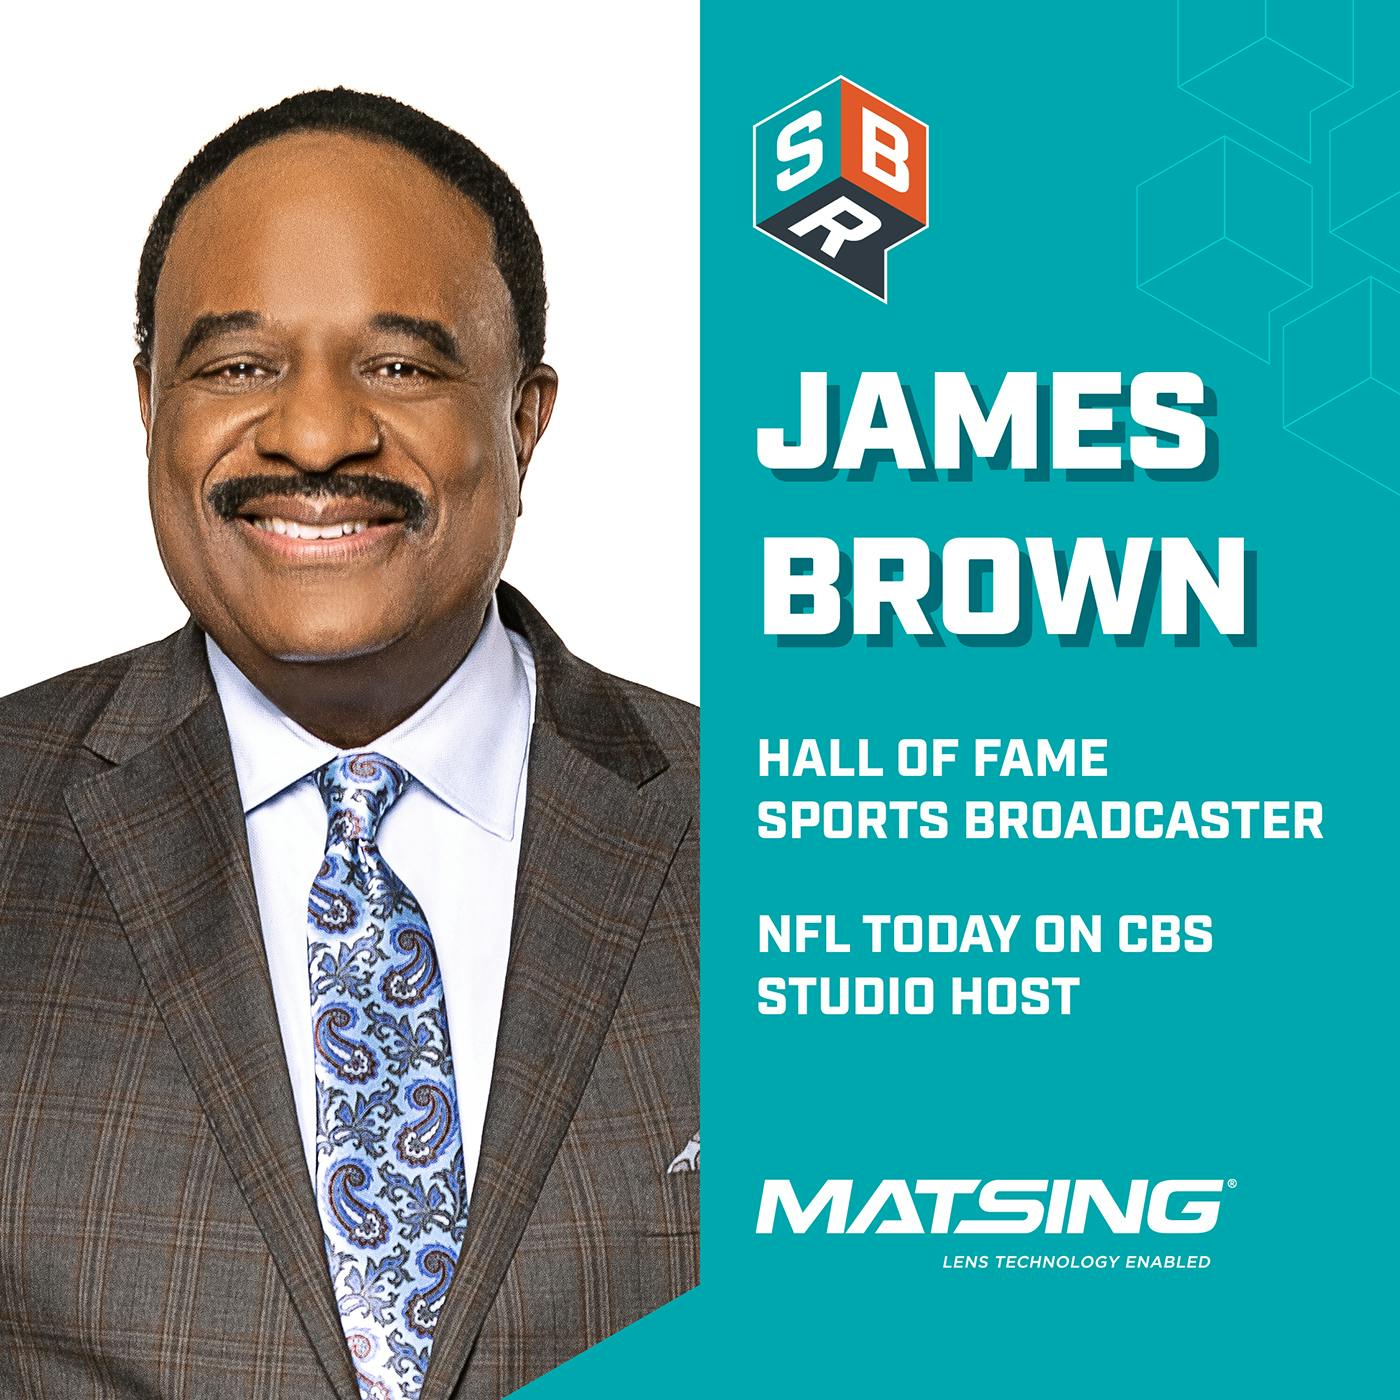 James Brown - NFL TODAY on CBS